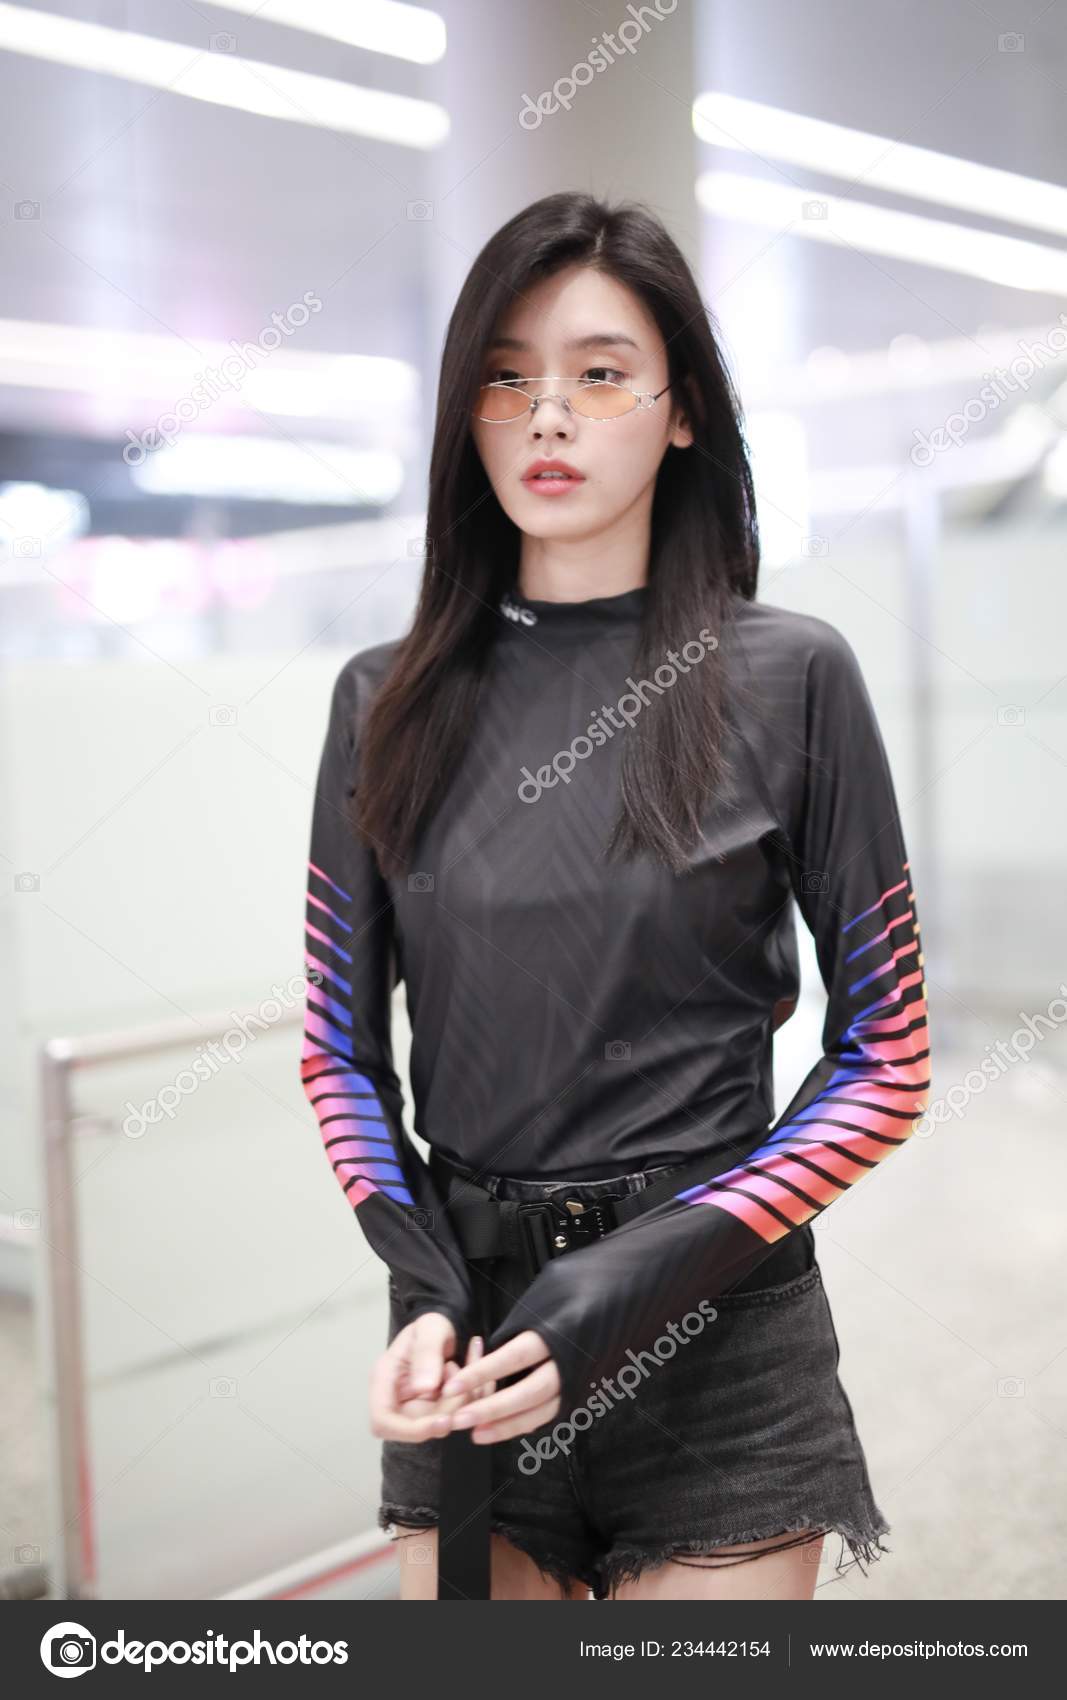 Chinese model Xi Mengyao, better known as Ming Xi, is pictured at  image